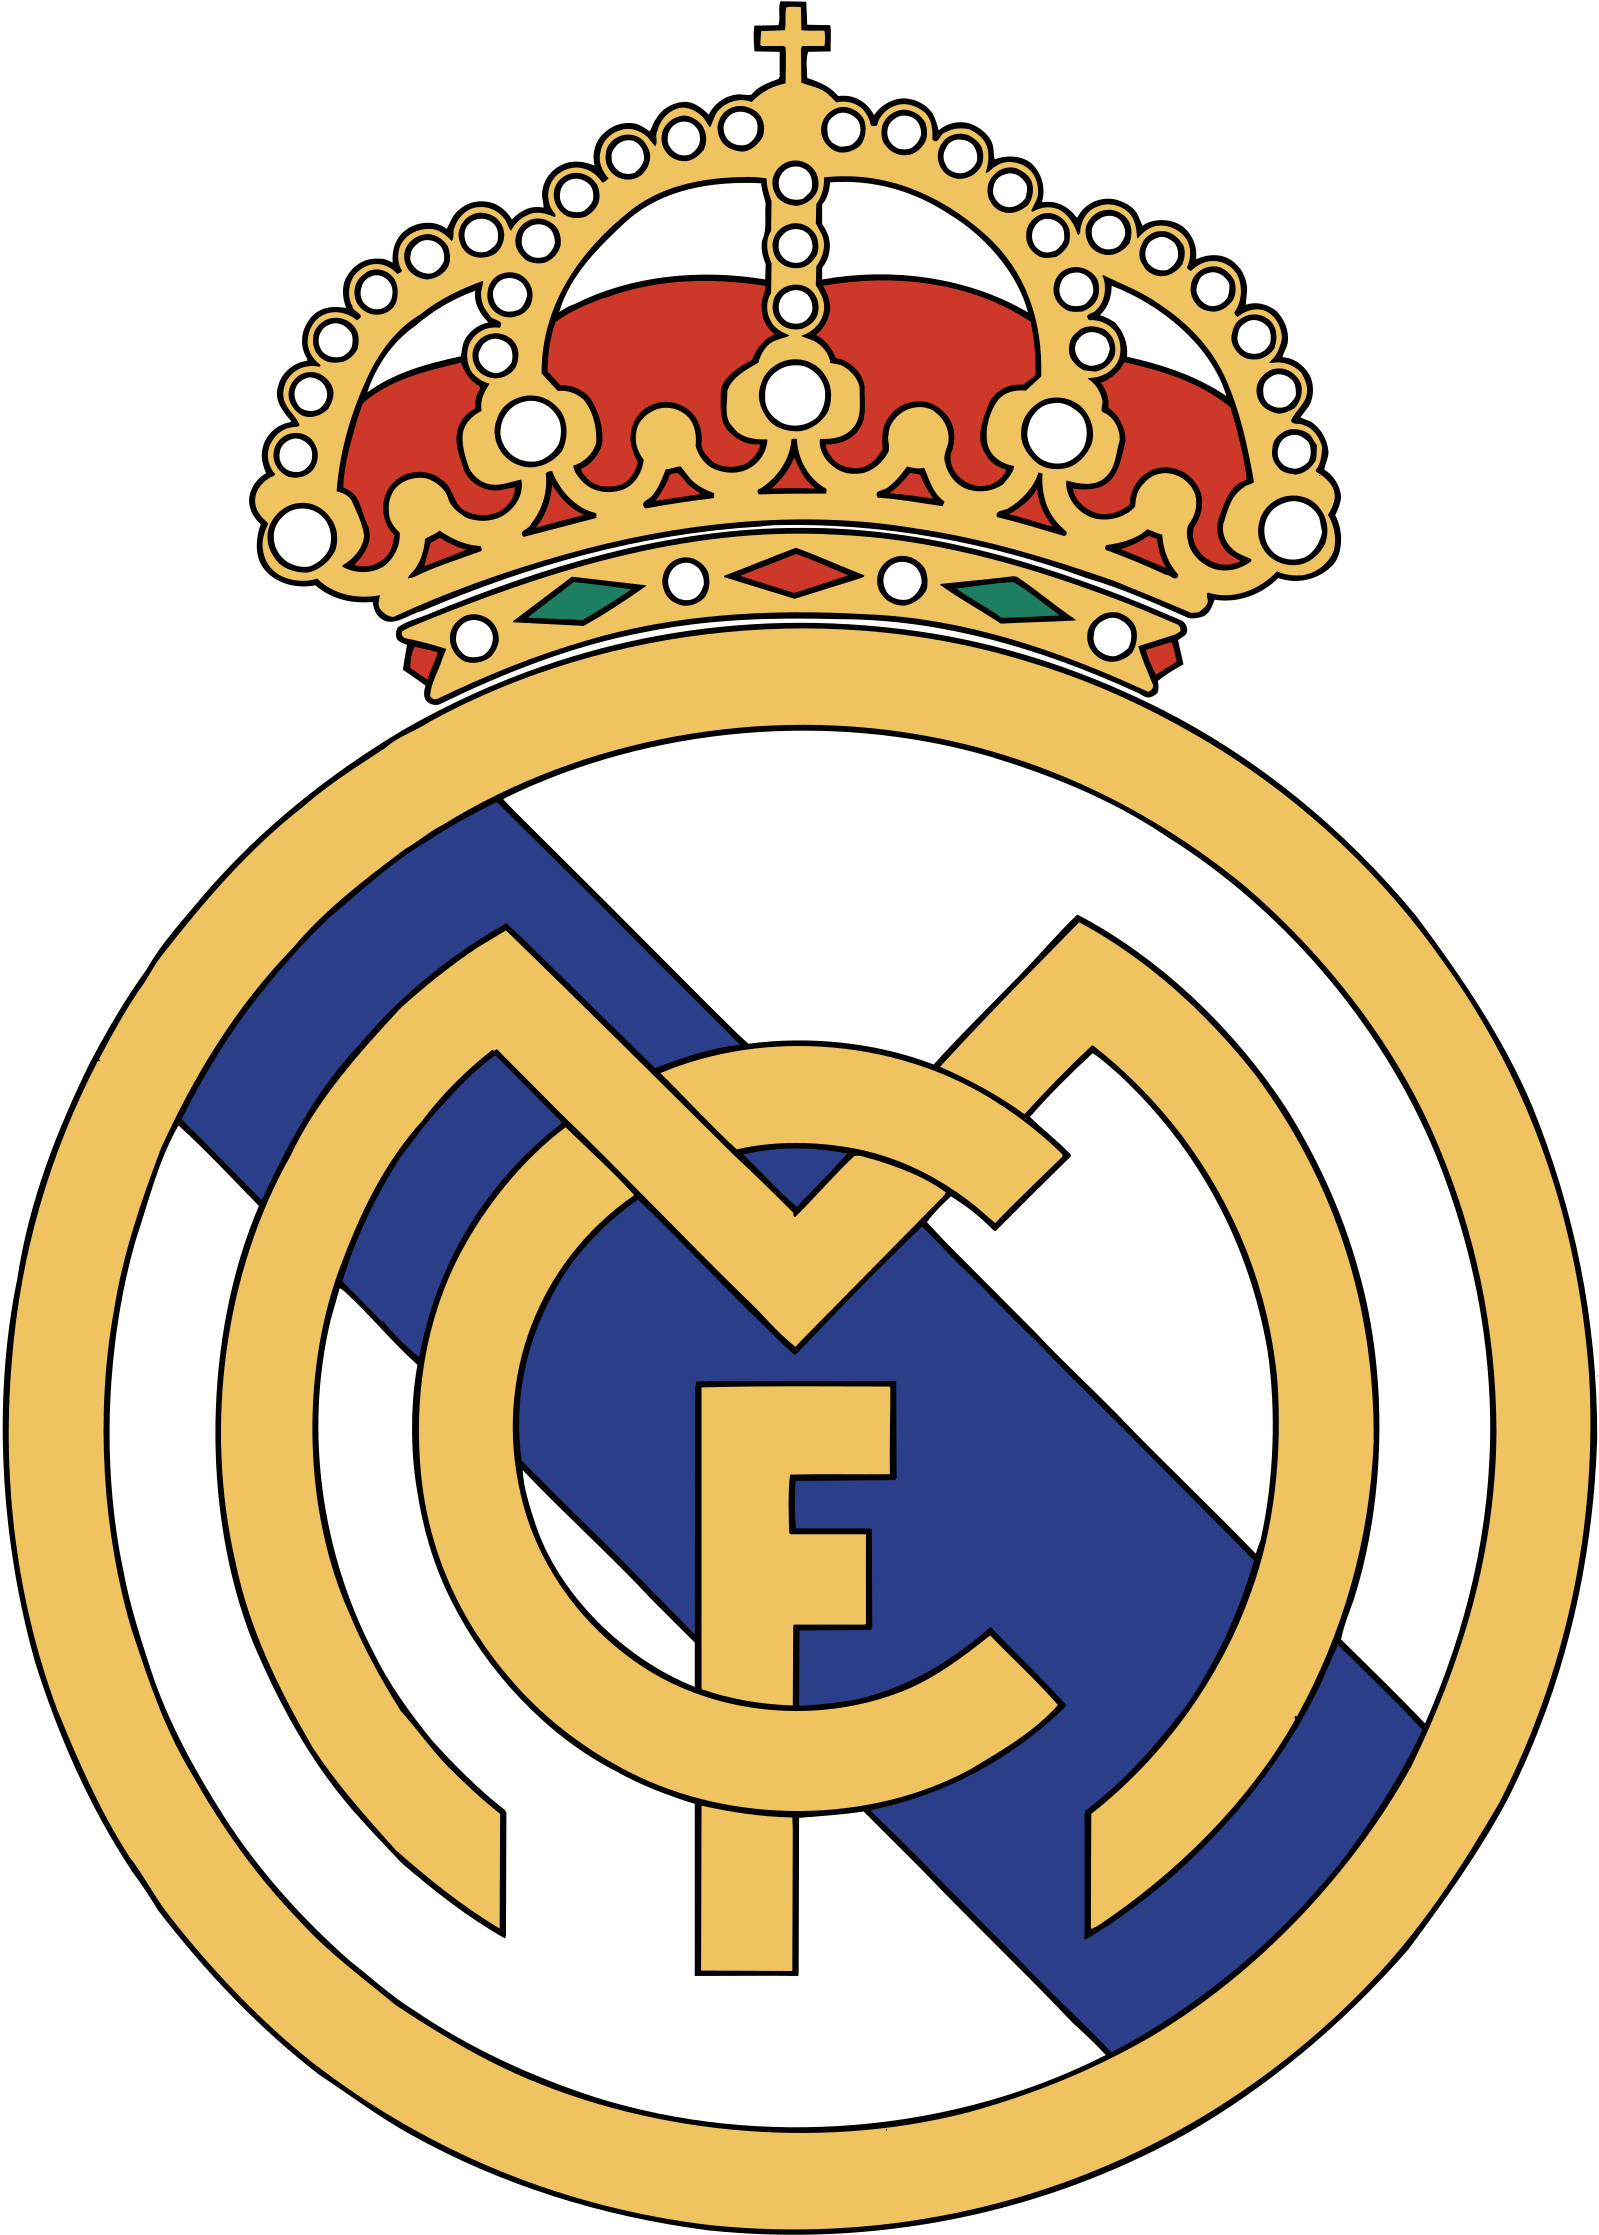 Real Madrid C F Logo Black And White - Real Madrid Logo Png (2400x2400)